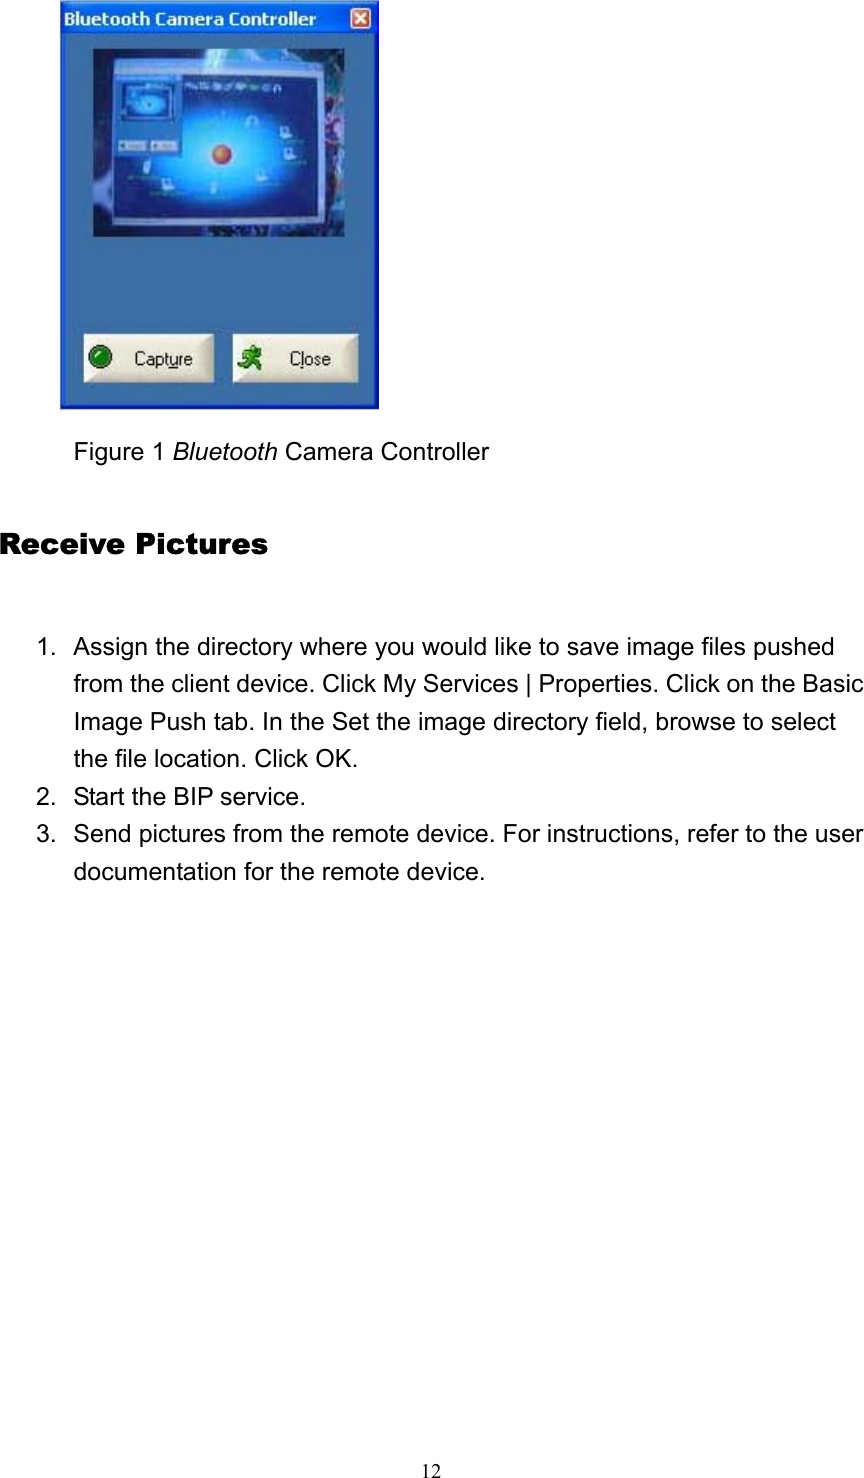   12                     Figure 1 Bluetooth Camera Controller Receive Pictures 1.  Assign the directory where you would like to save image files pushed from the client device. Click My Services | Properties. Click on the Basic Image Push tab. In the Set the image directory field, browse to select the file location. Click OK.   2.  Start the BIP service.   3.  Send pictures from the remote device. For instructions, refer to the user documentation for the remote device.   